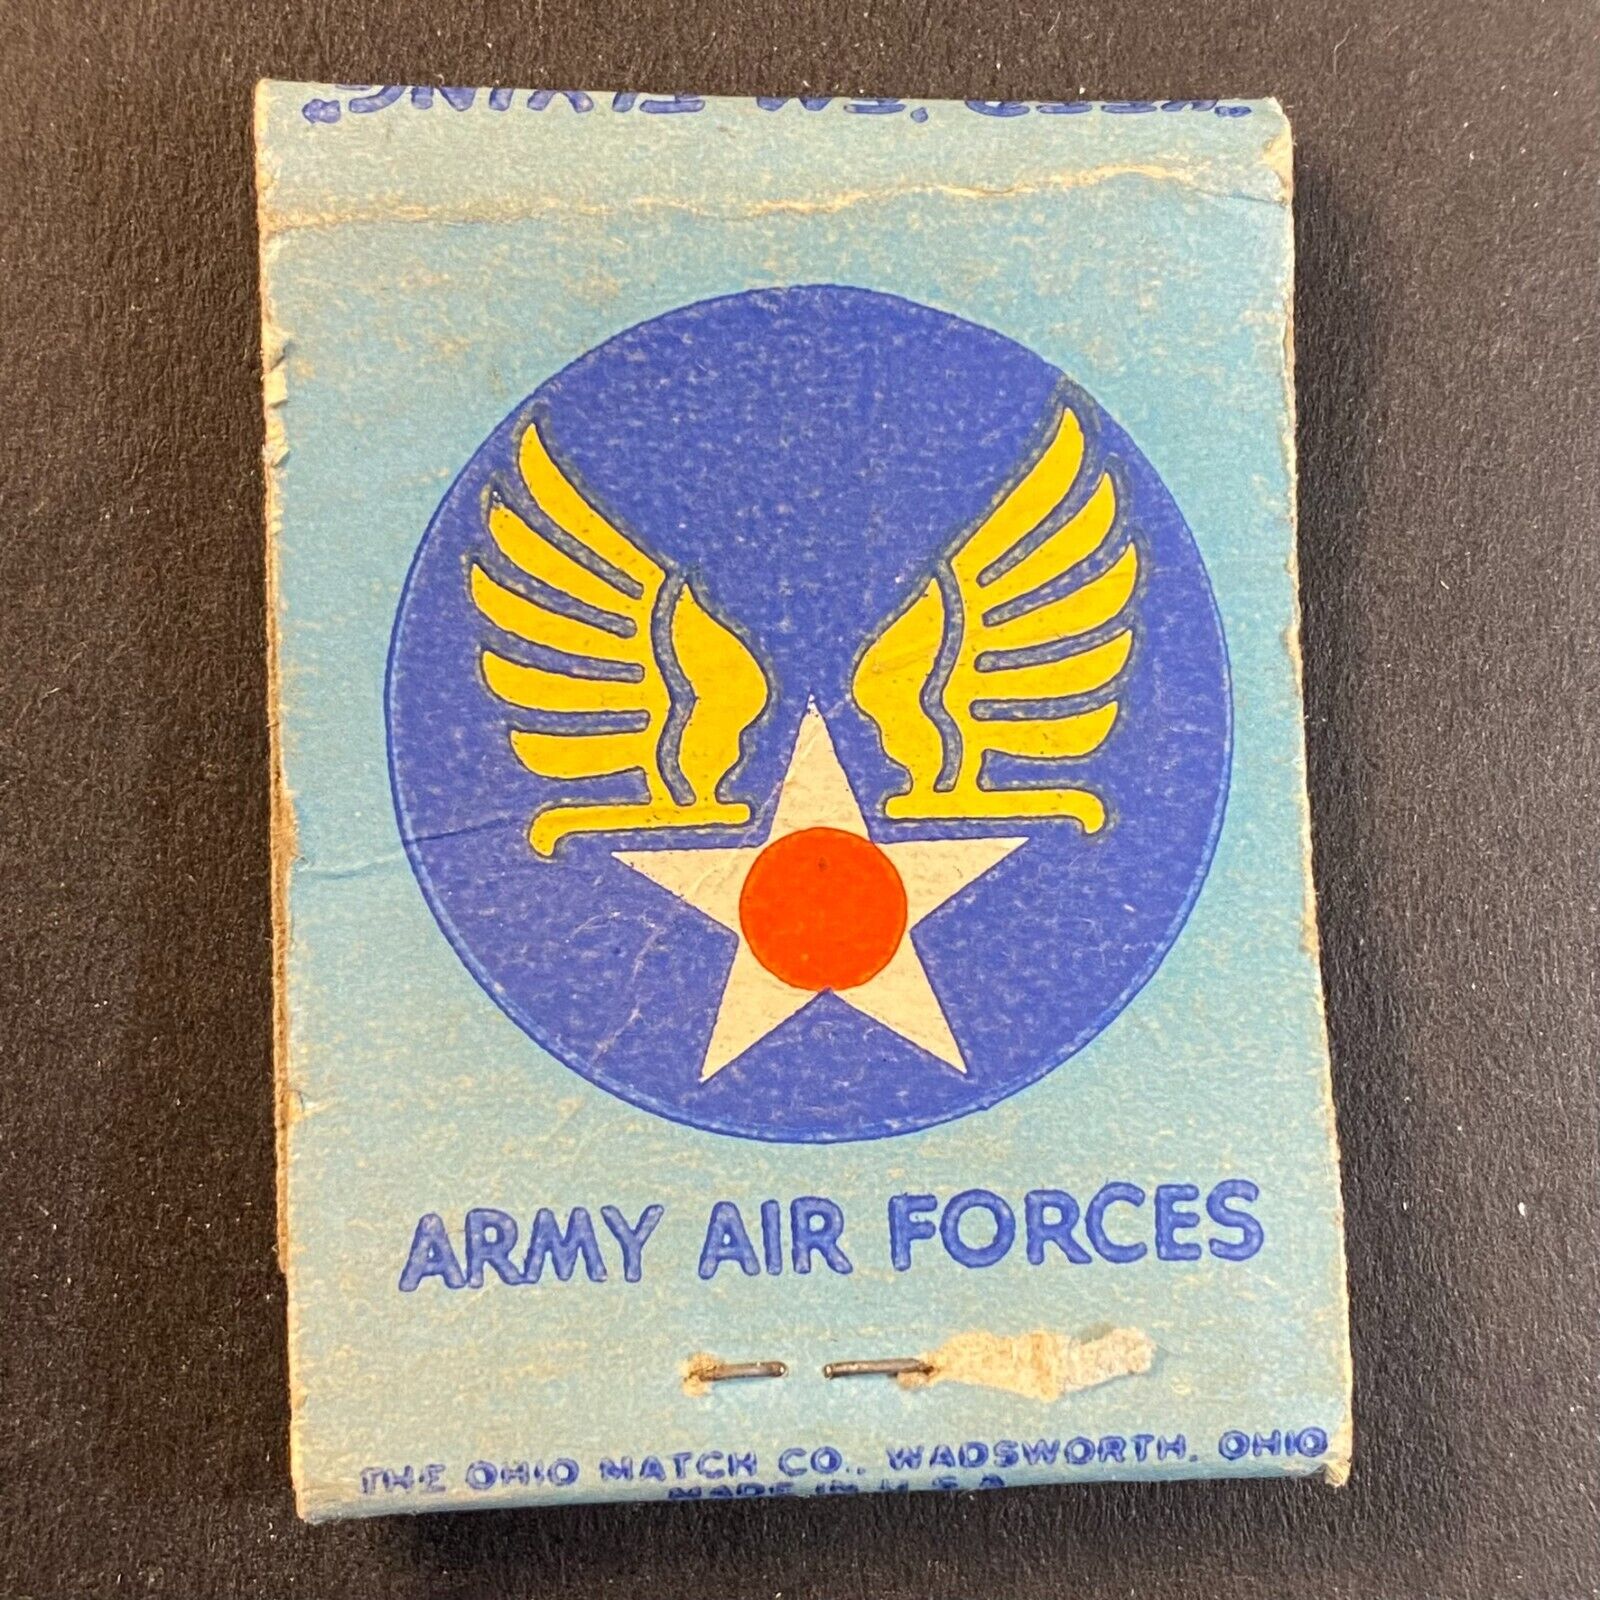 Army Air Base Exchange Sioux City Iowa c1942-50's WWII Era Matchbook Cover